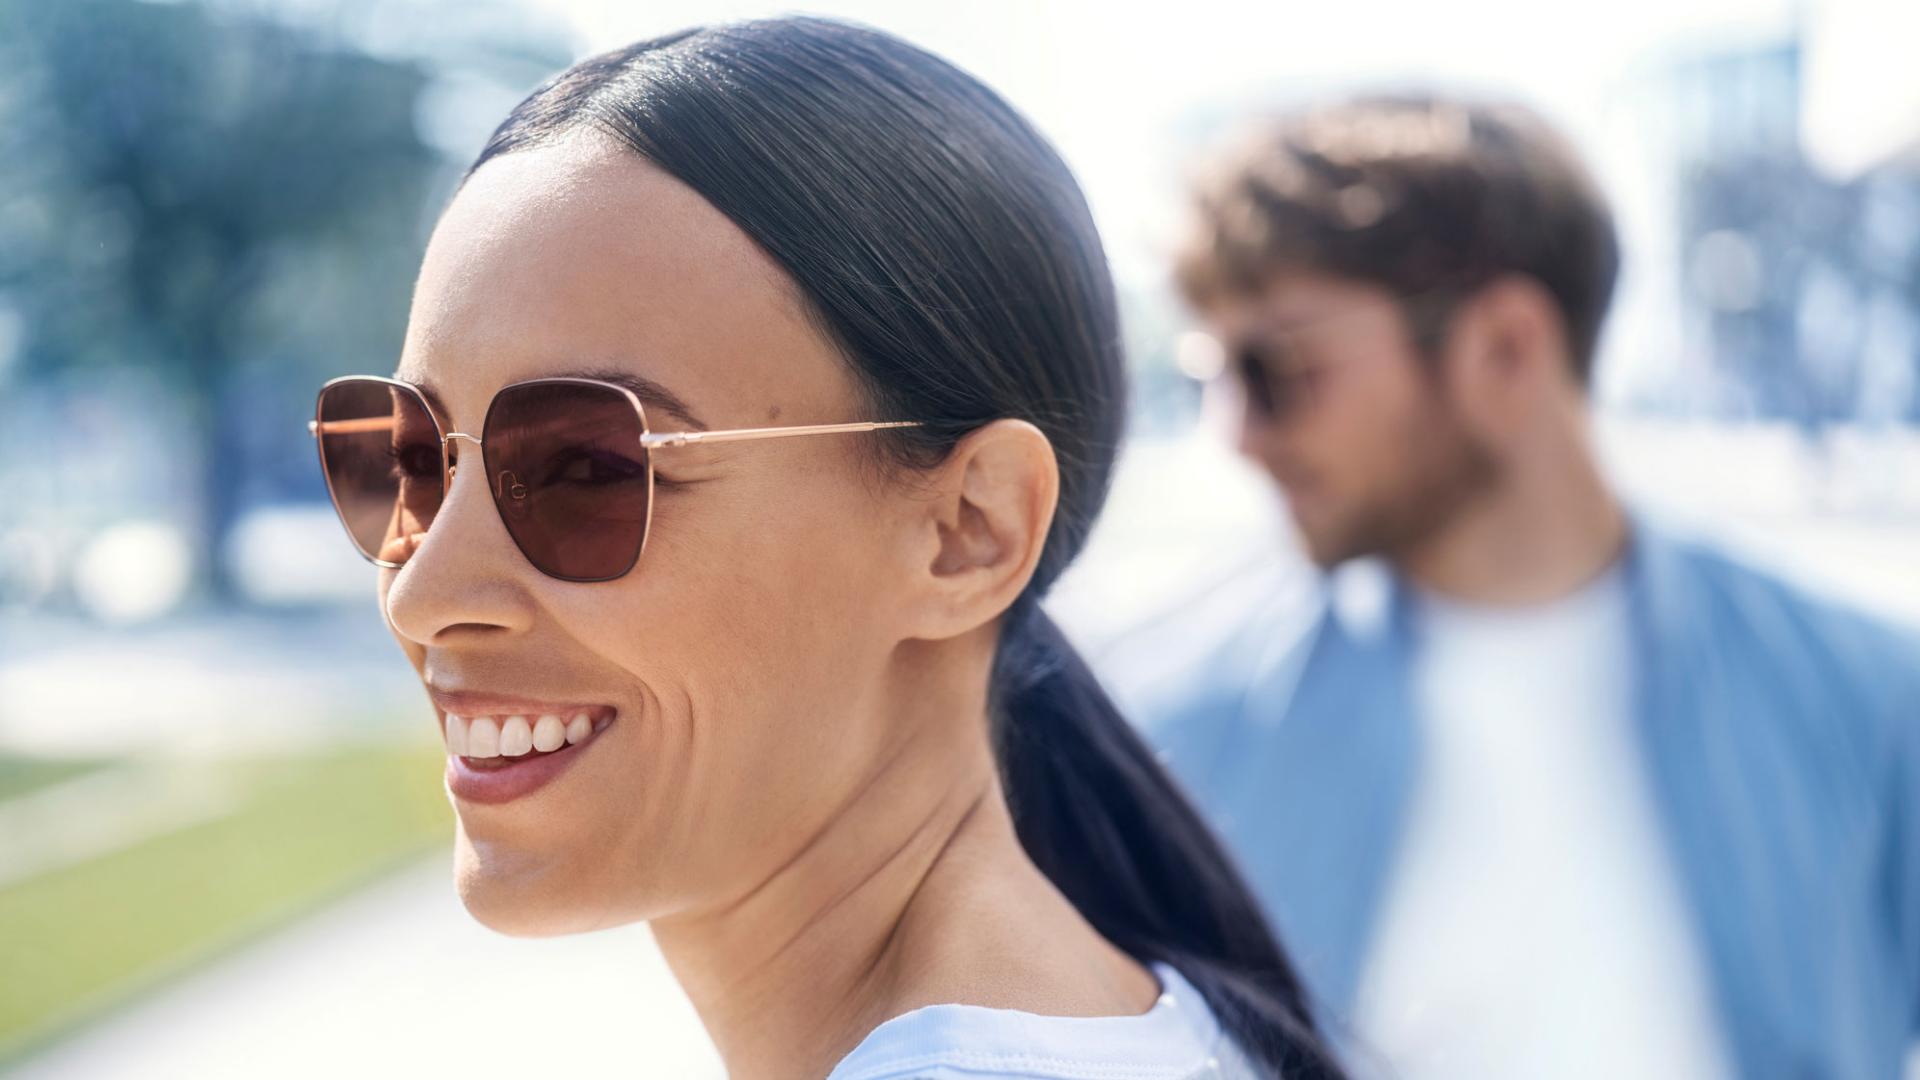 Front: smiling woman with sunglasses, background: a man with glasses